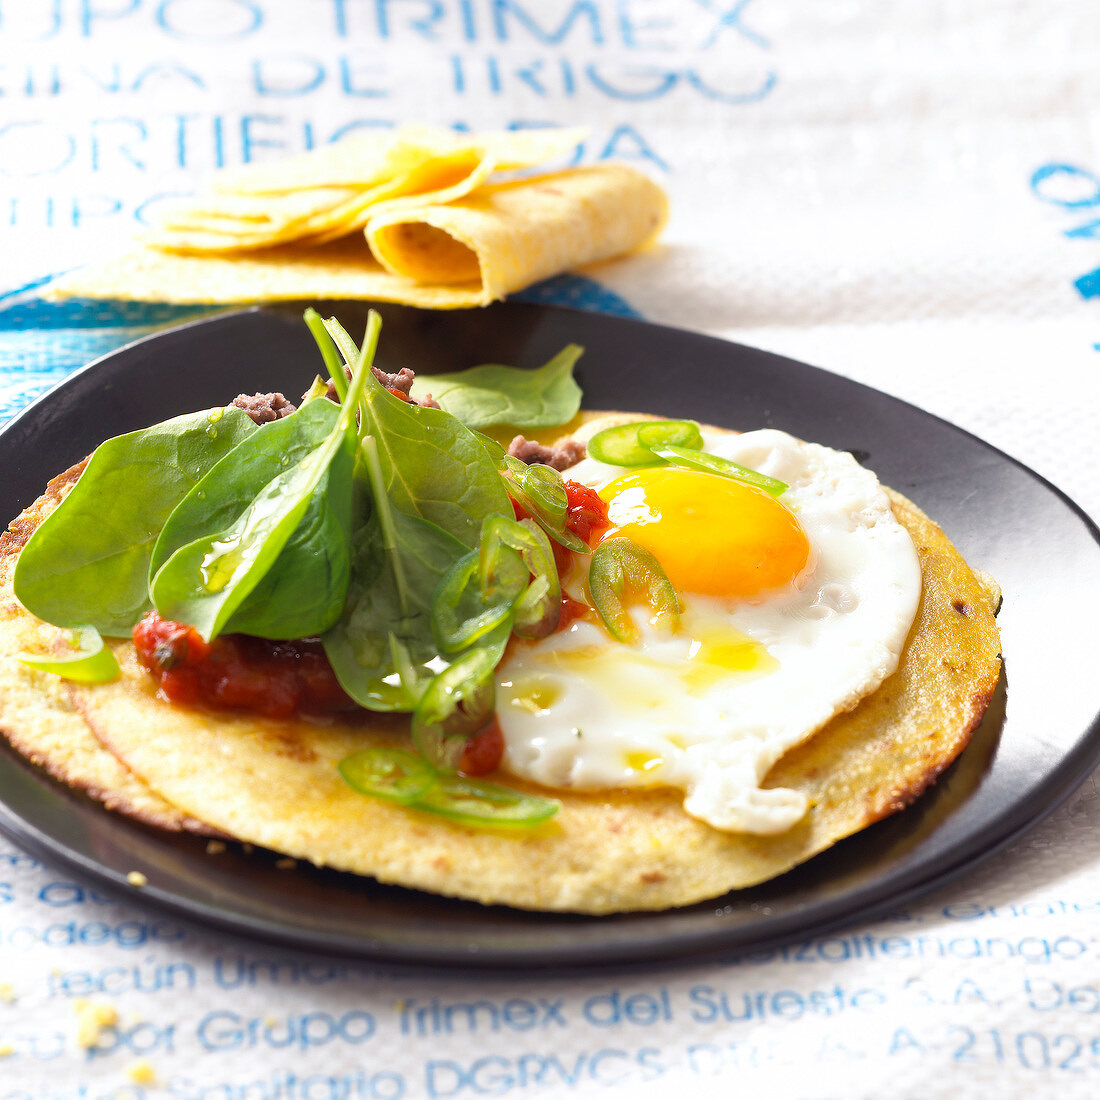 Savoury pancakes with fried egg,tomato and raw spinach